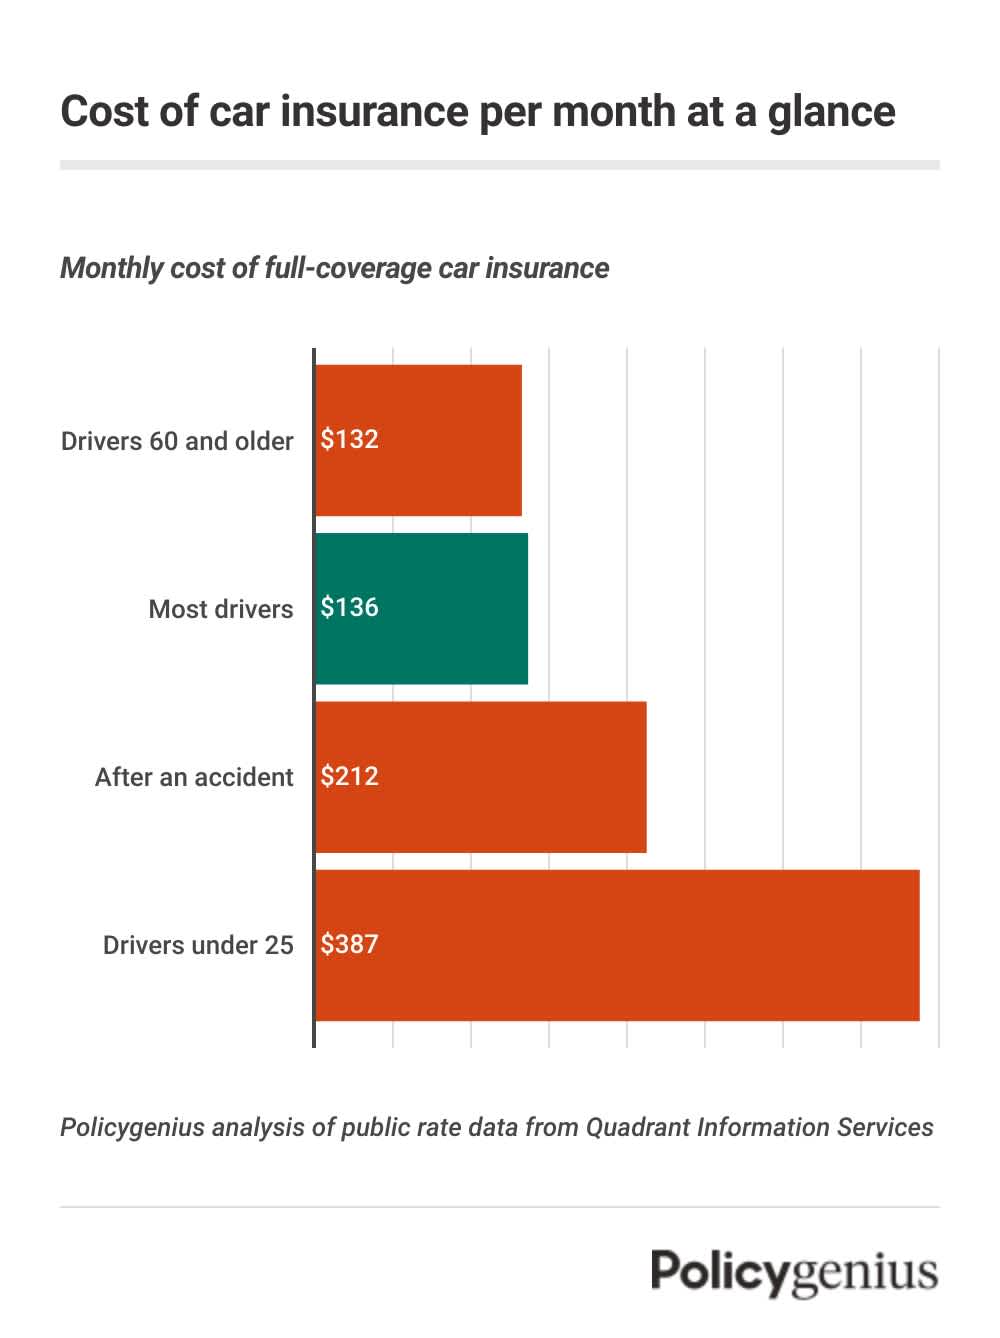 A bar graph showing the average cost of car insurance per month for most drivers compared with seniors, drivers who have been in a past accident, and drivers under 25 years old.